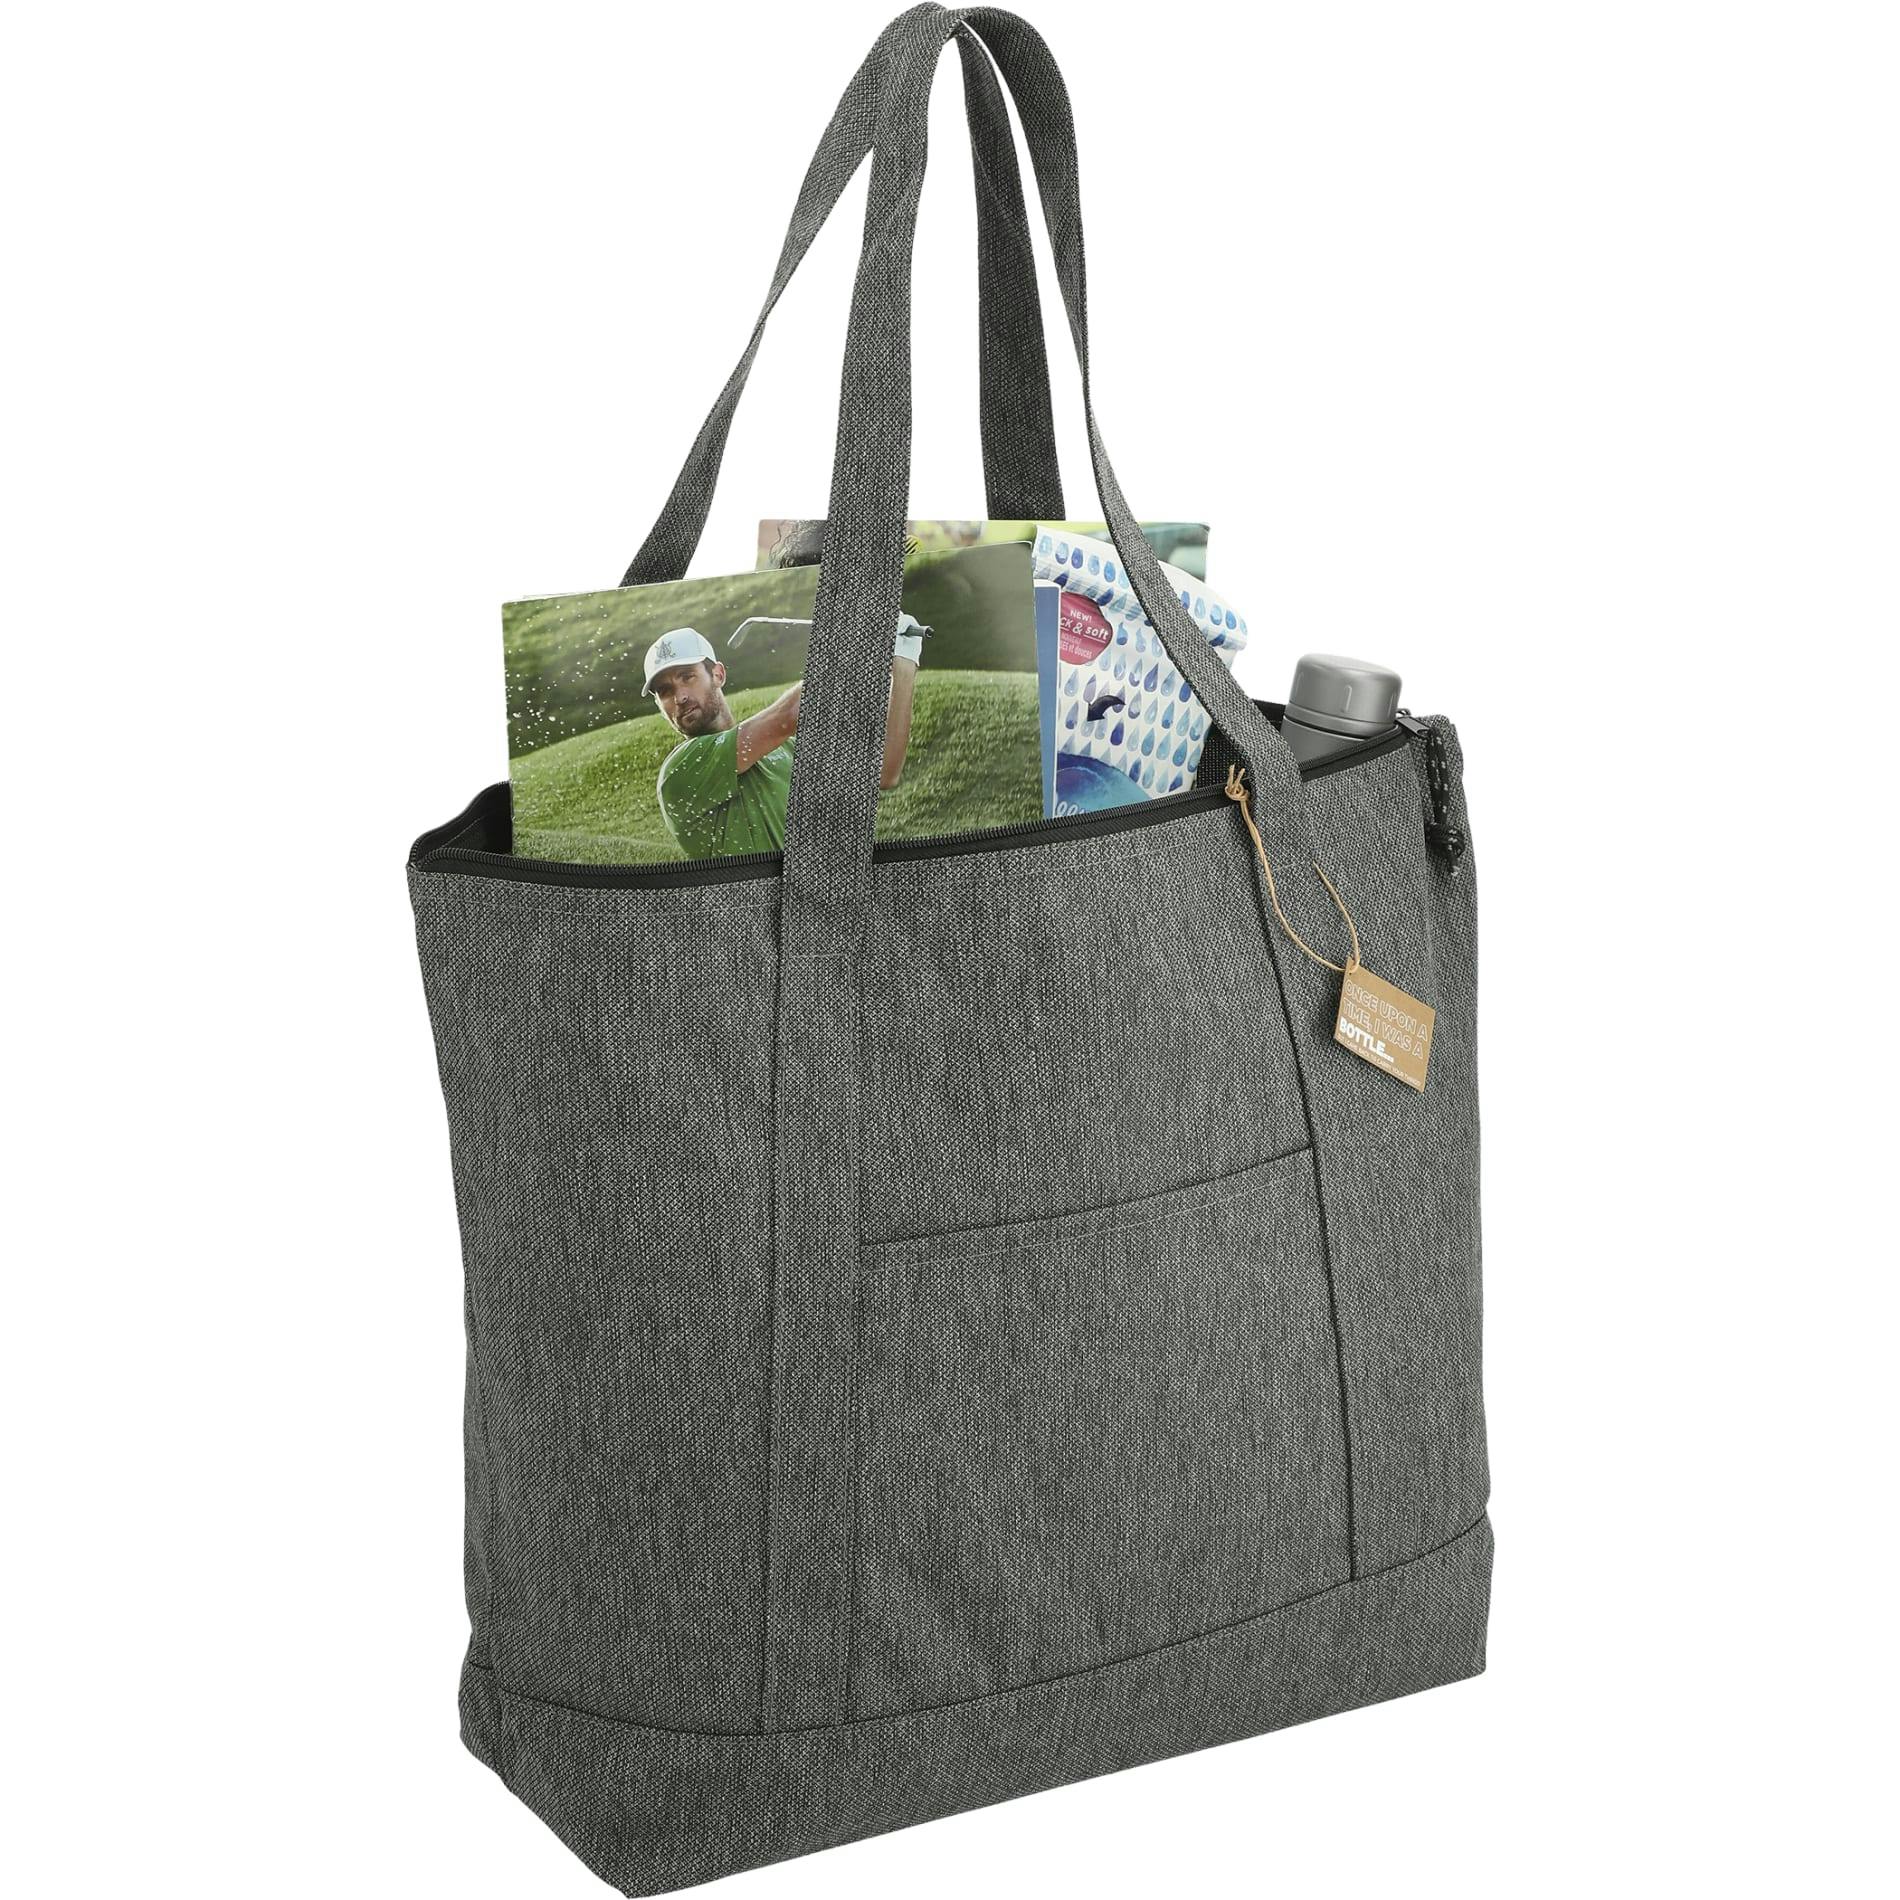 Vila Recycled Boat Tote - additional Image 4